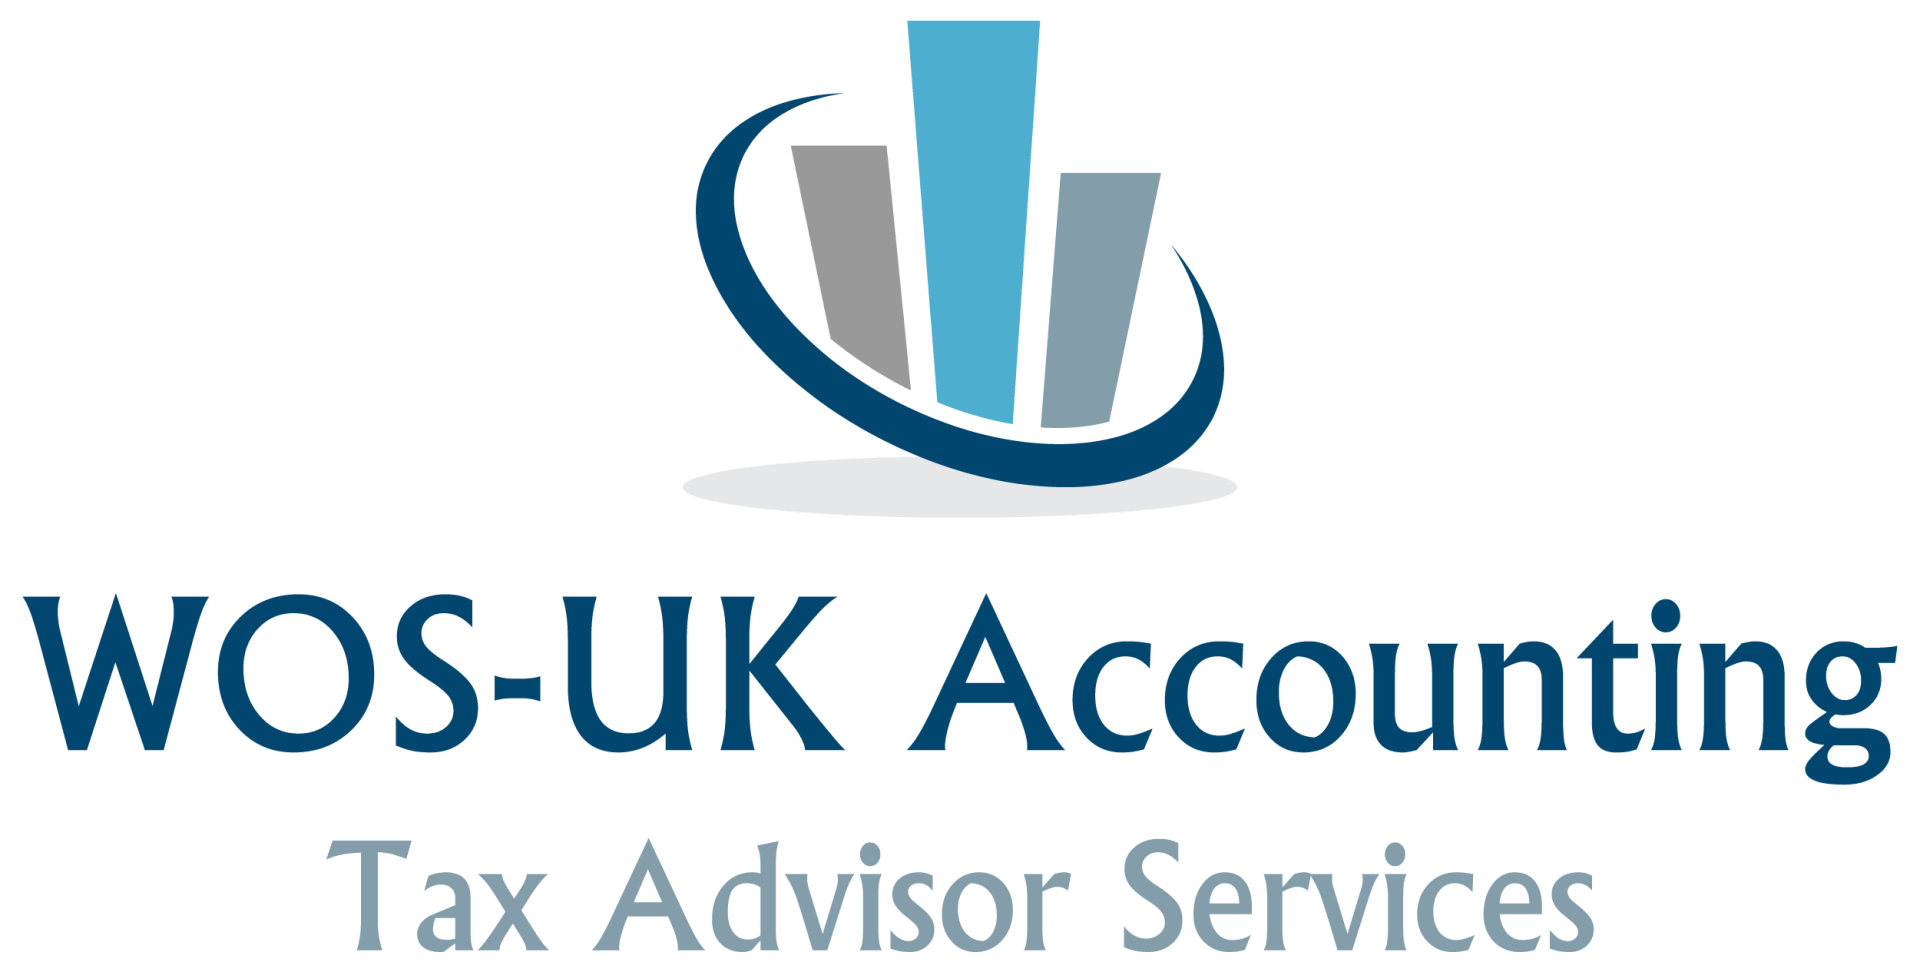 WOS-UK Accounting & Tax Advisor Services